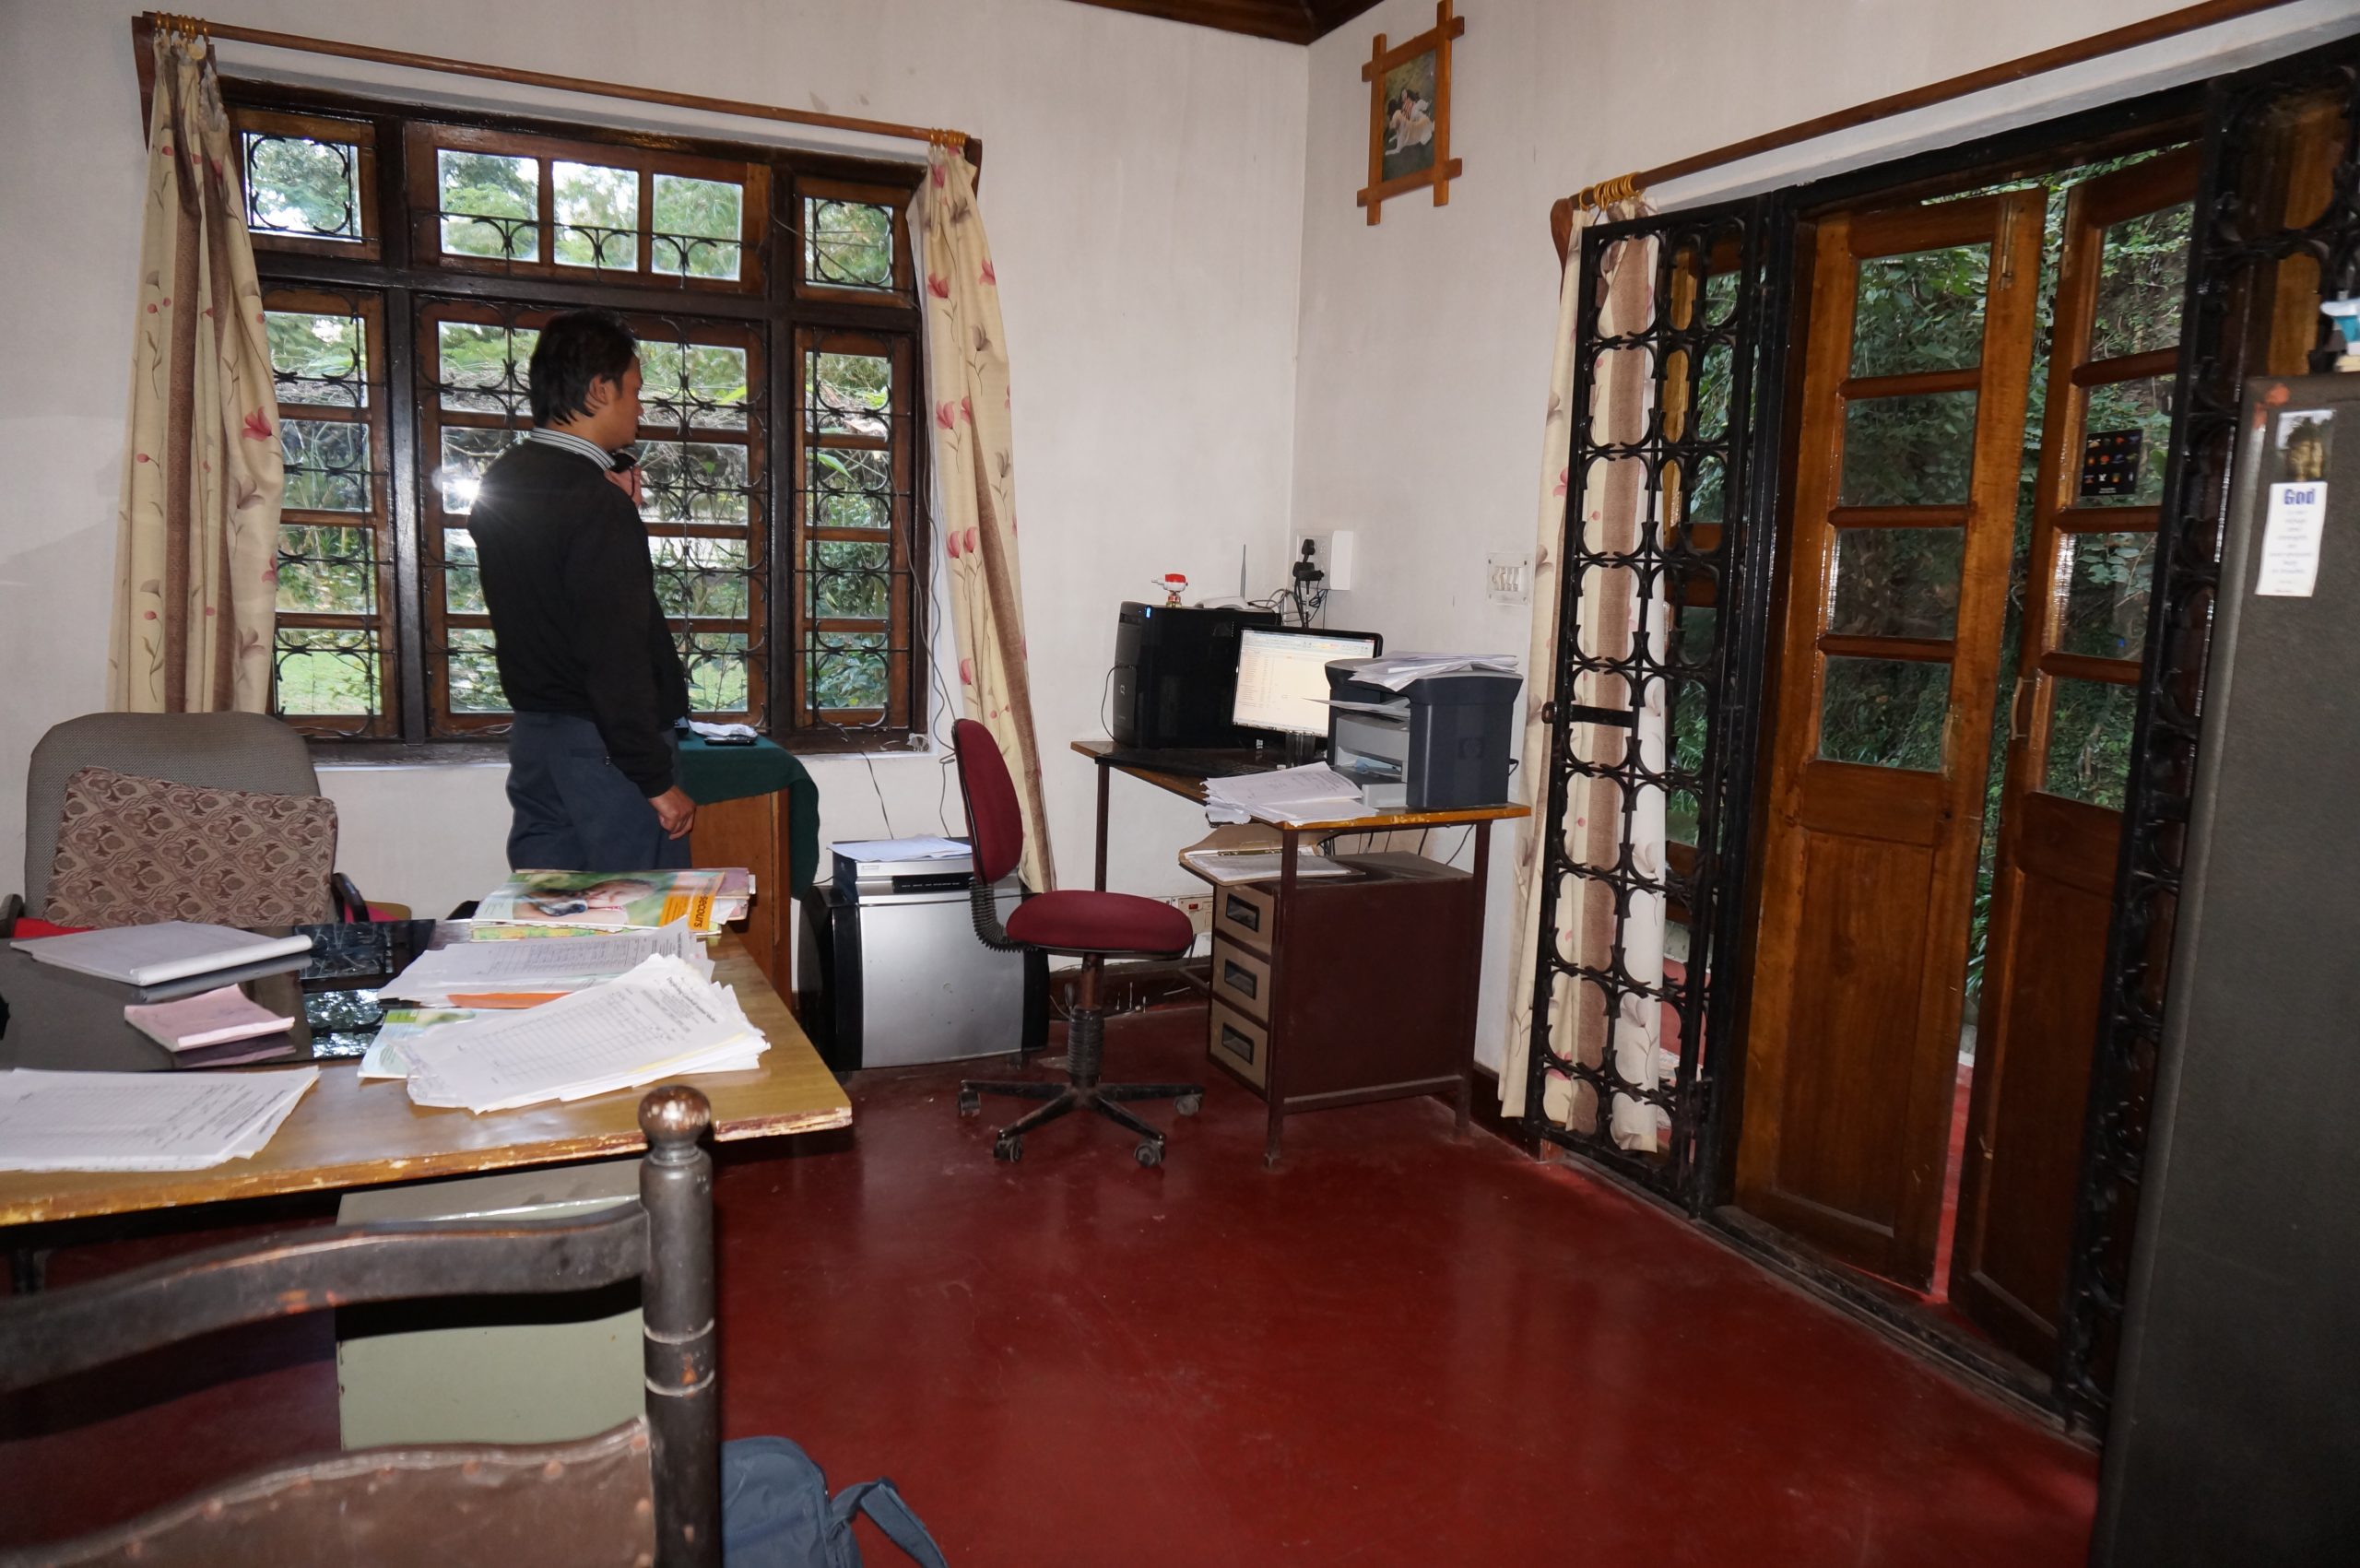 Arpan Karthak, manager, in the office at KAS